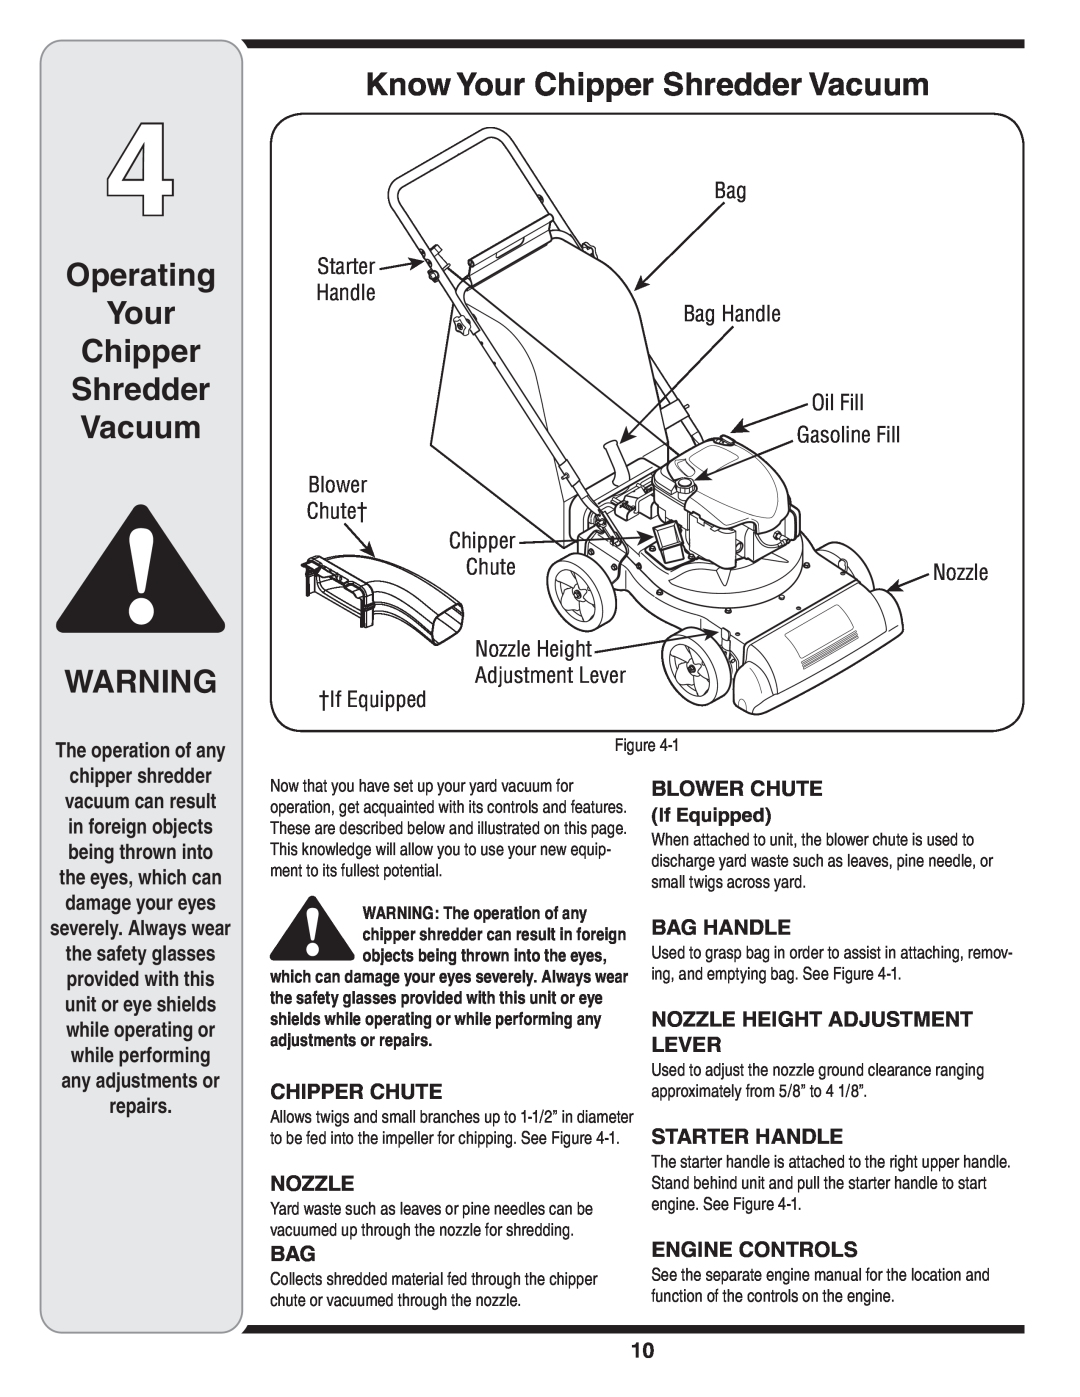 MTD Series 020 warranty Operating Your Chipper Shredder Vacuum, Know Your Chipper Shredder Vacuum 